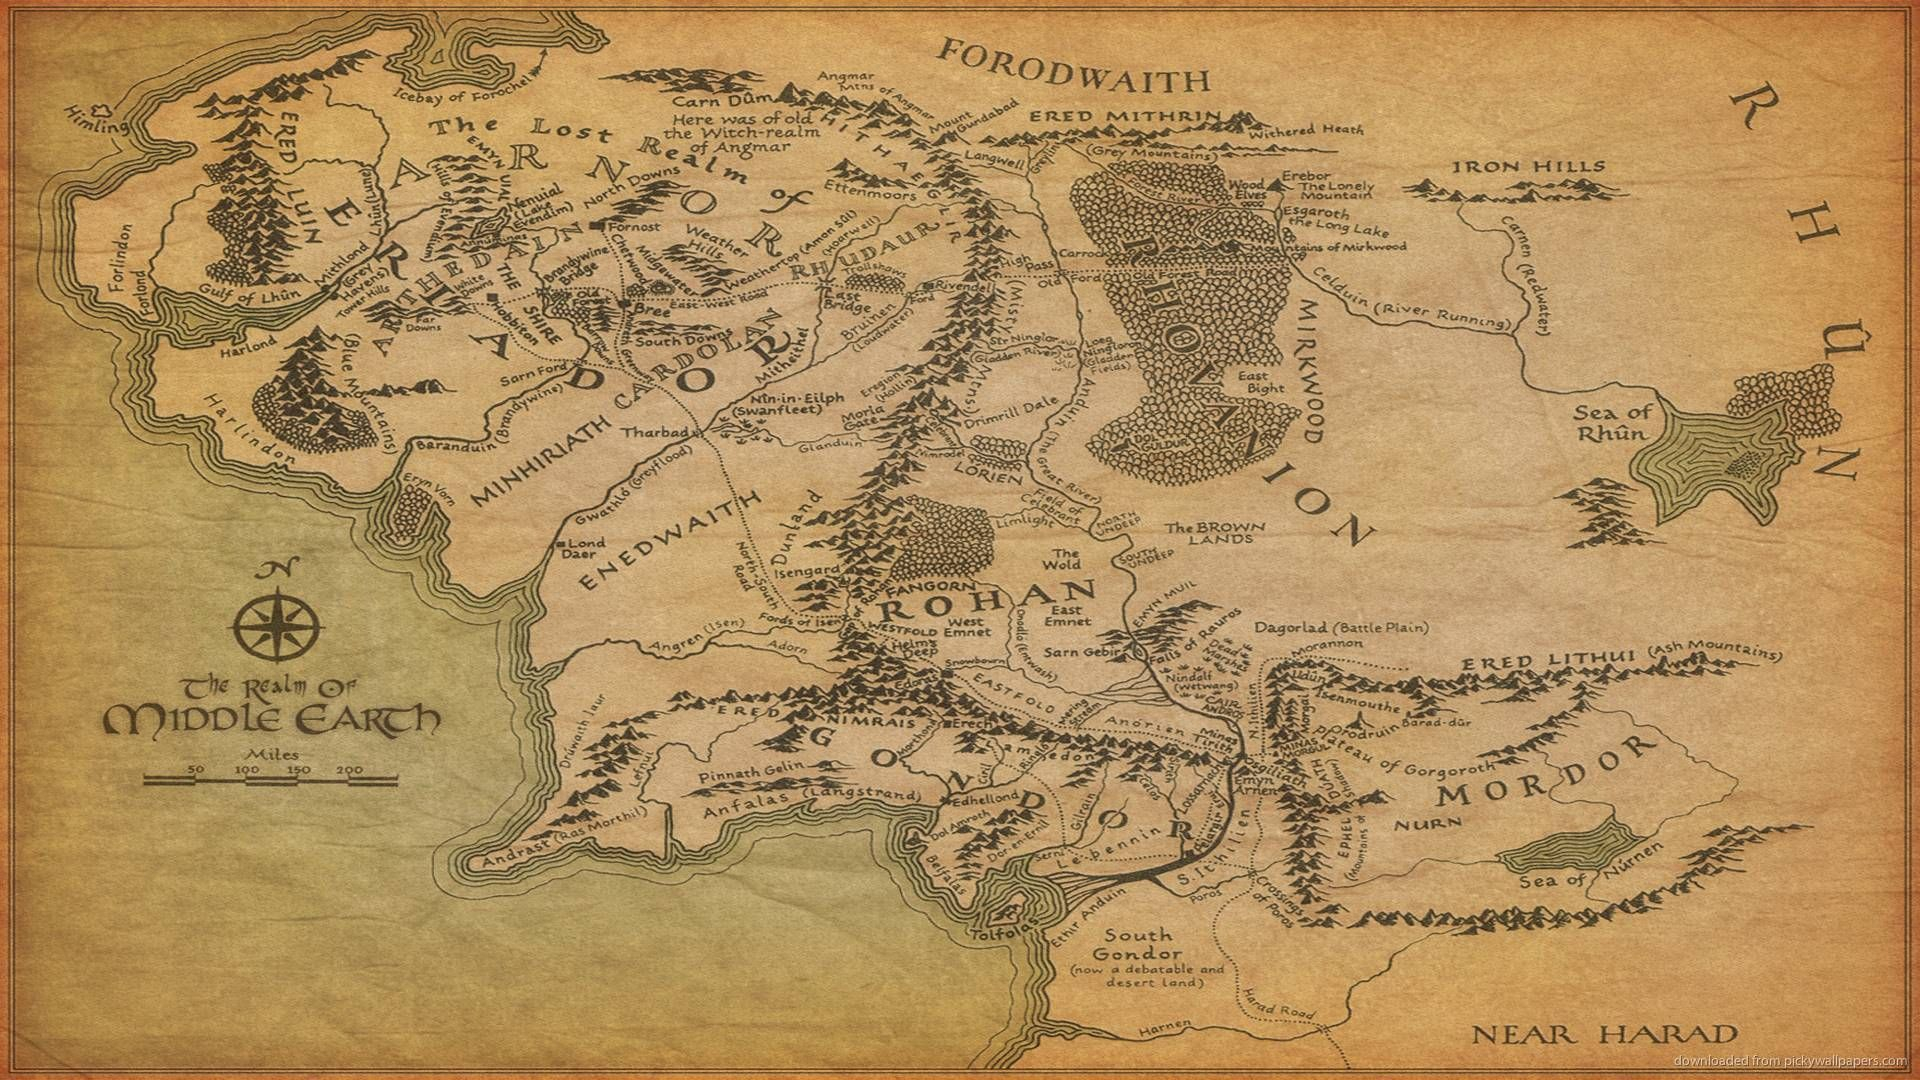 1920x1080 Lord of the Rings Map Wallpapers Top Free Lord of the Rings Map Backgrounds